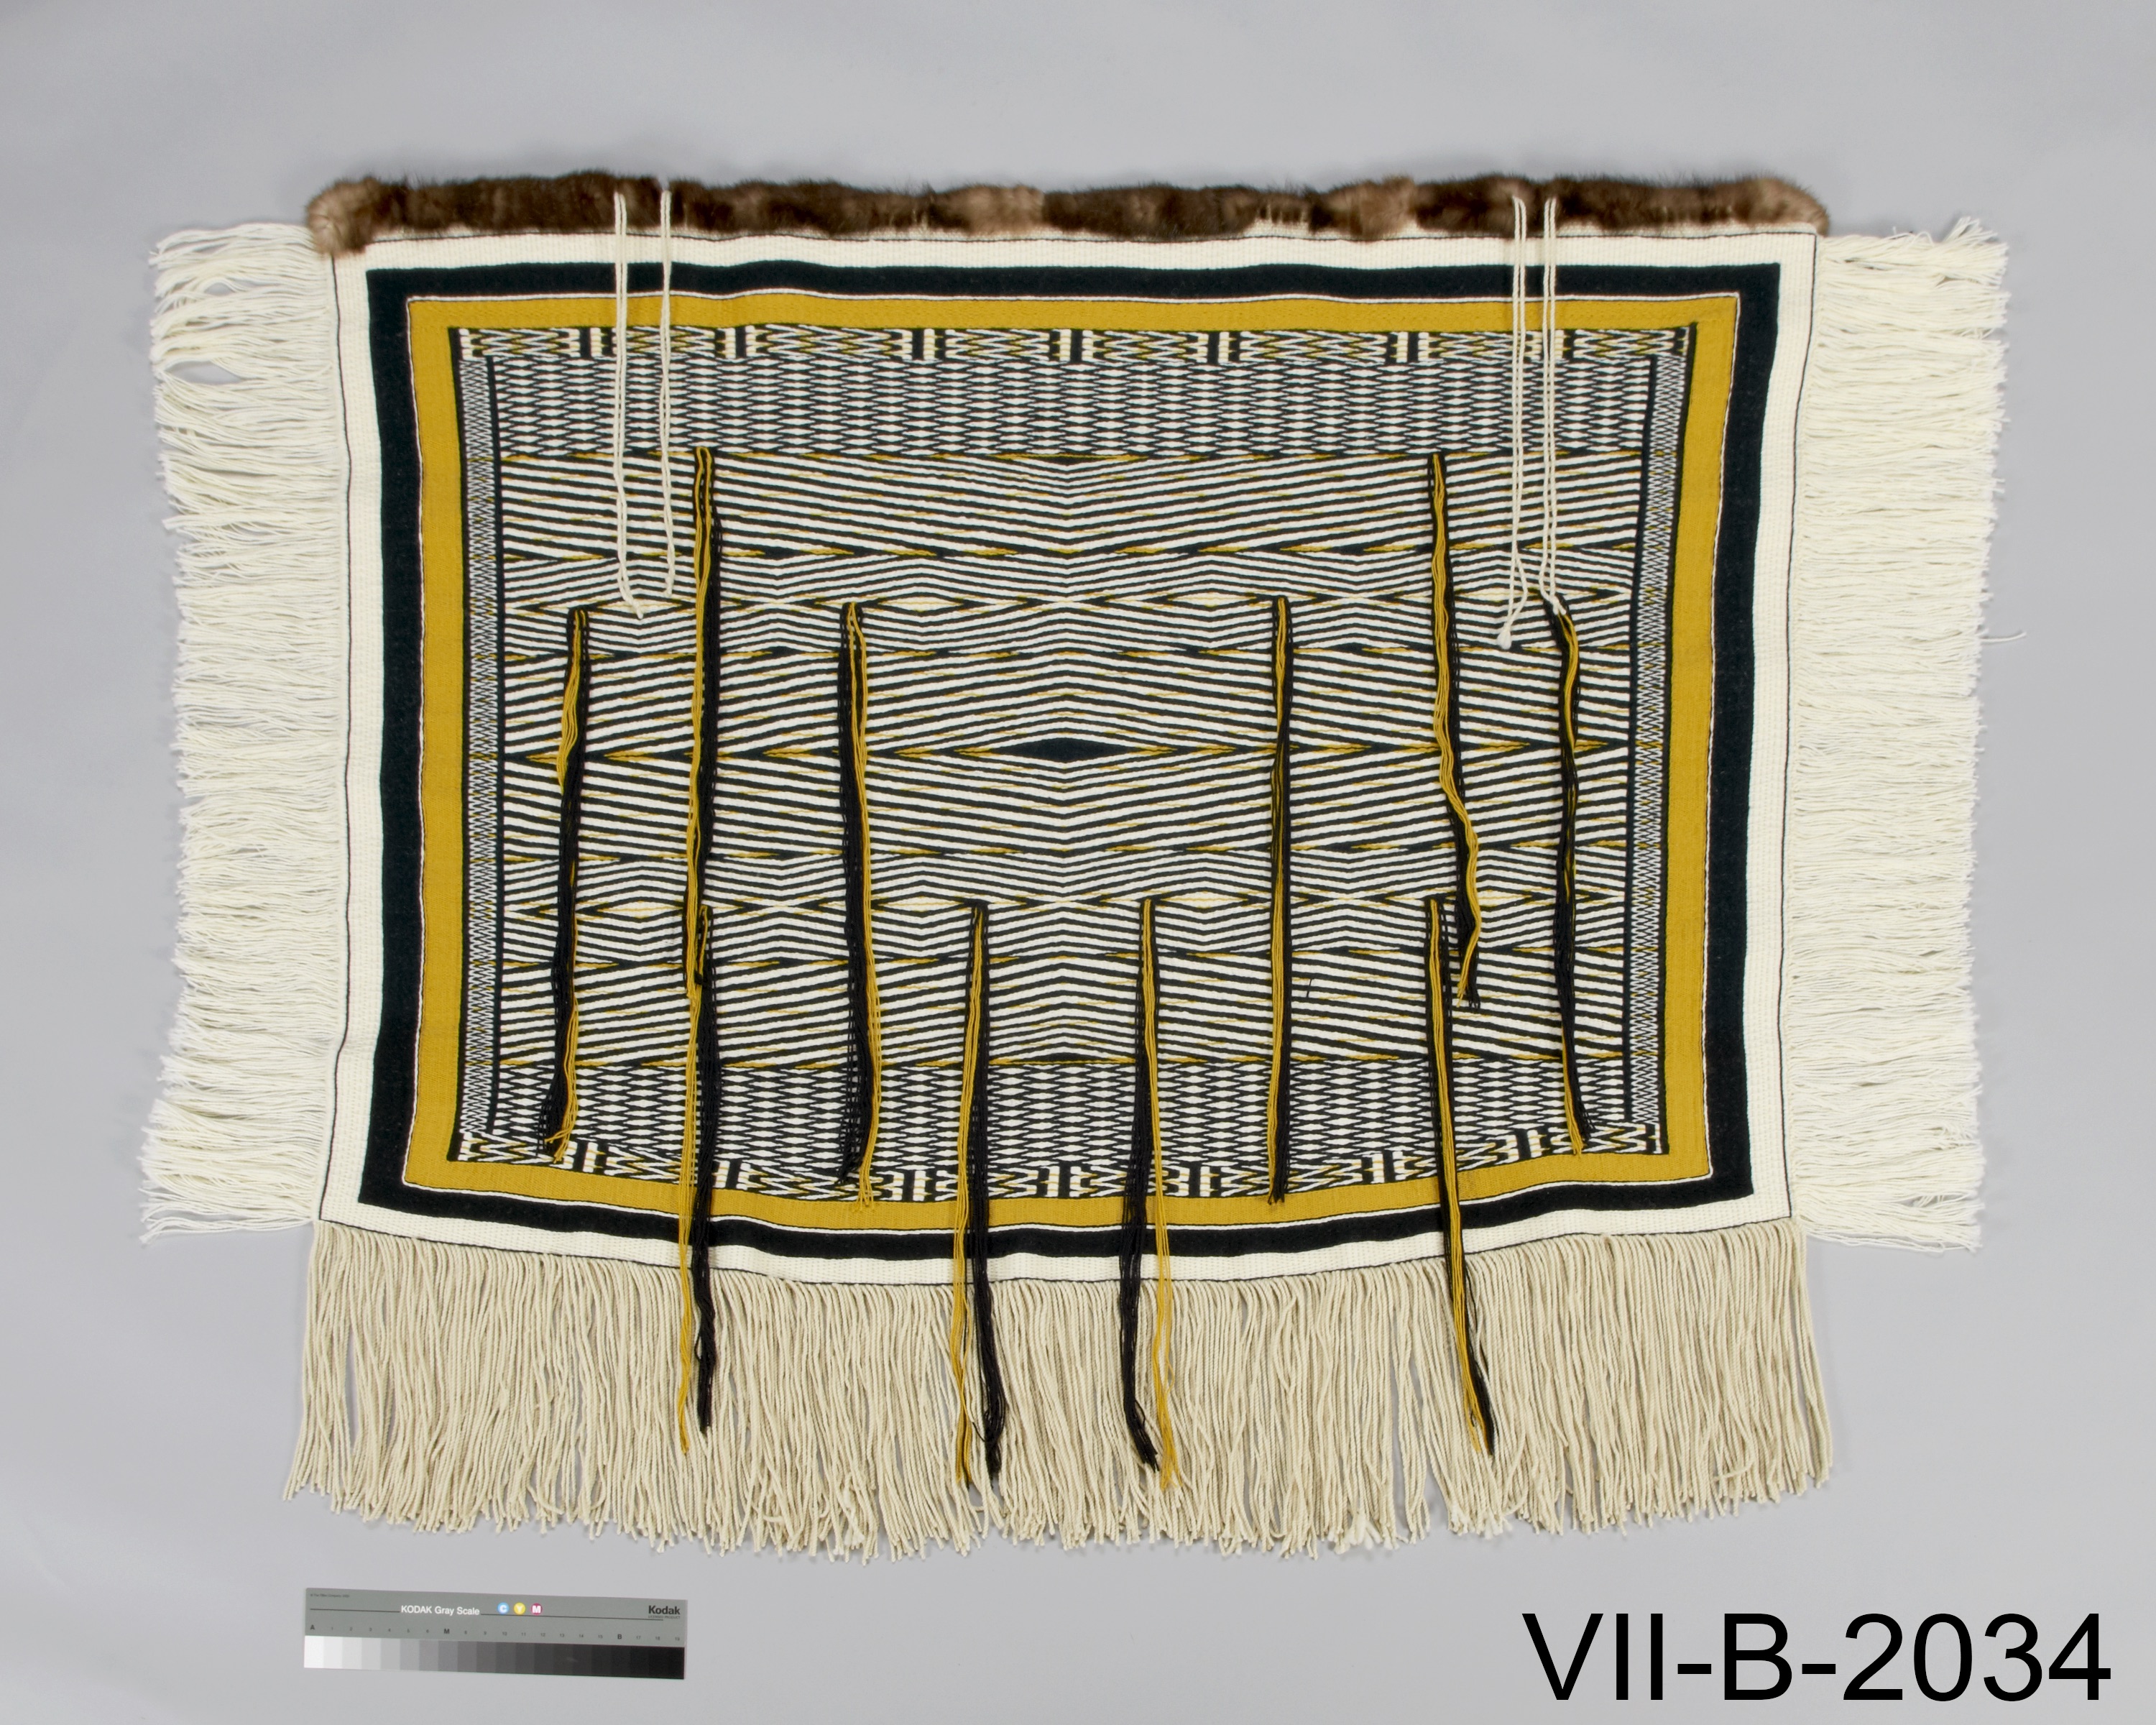 large Raven’s Tail style ceremonial robe in black, white and yellow